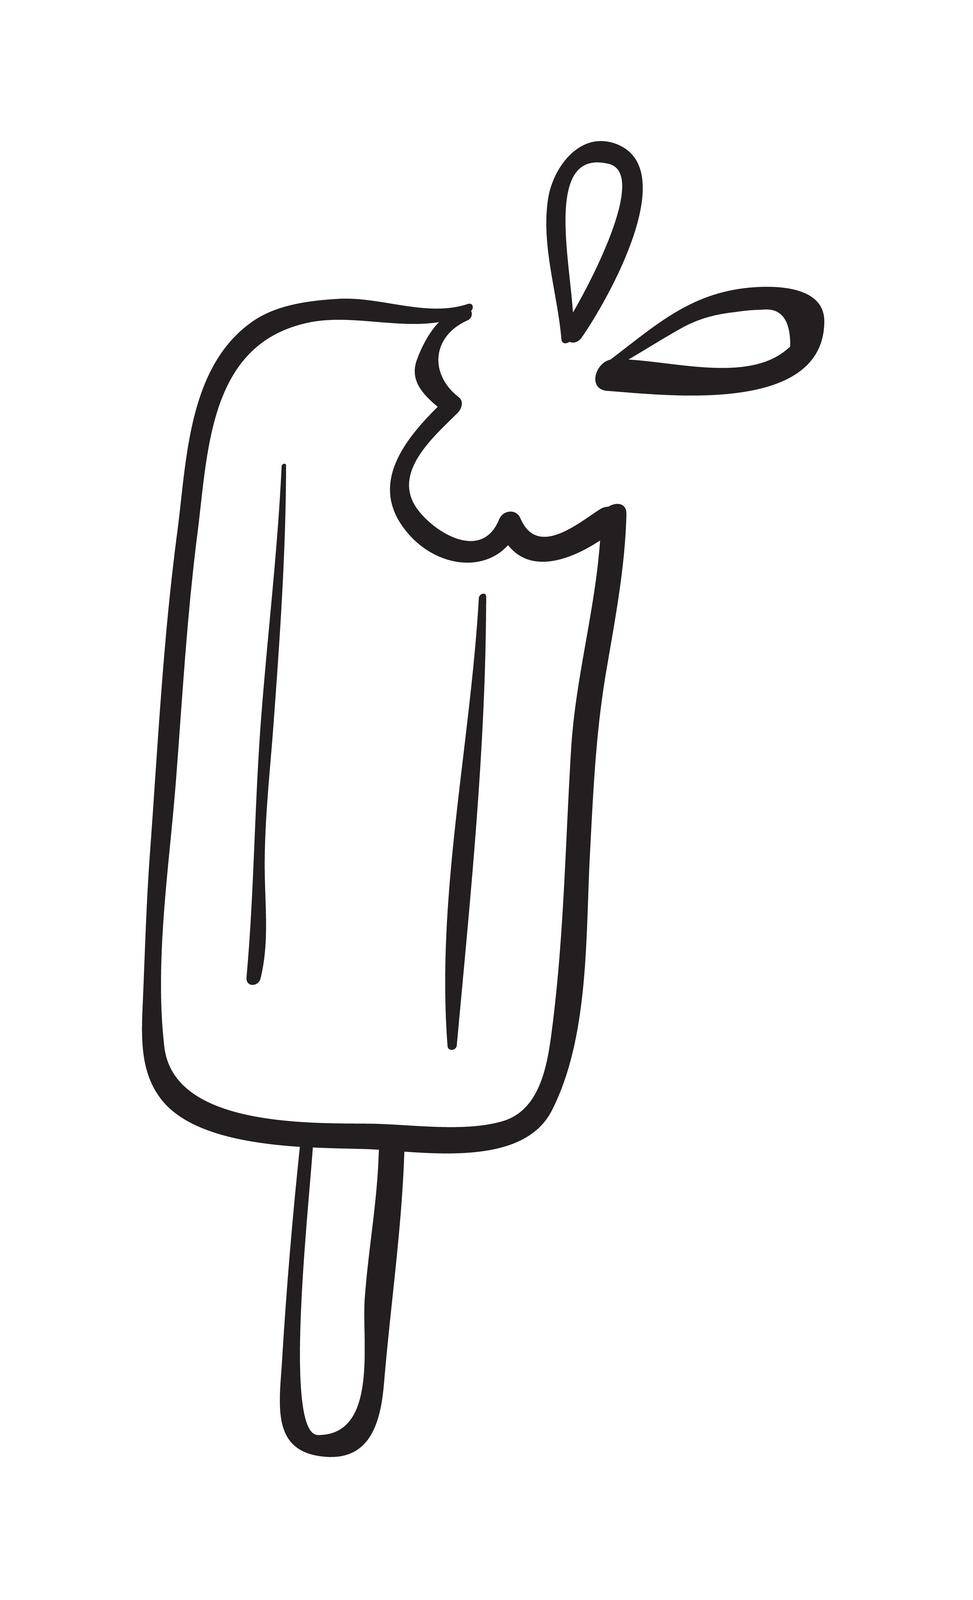 illustration of an icecream sketch on a white background